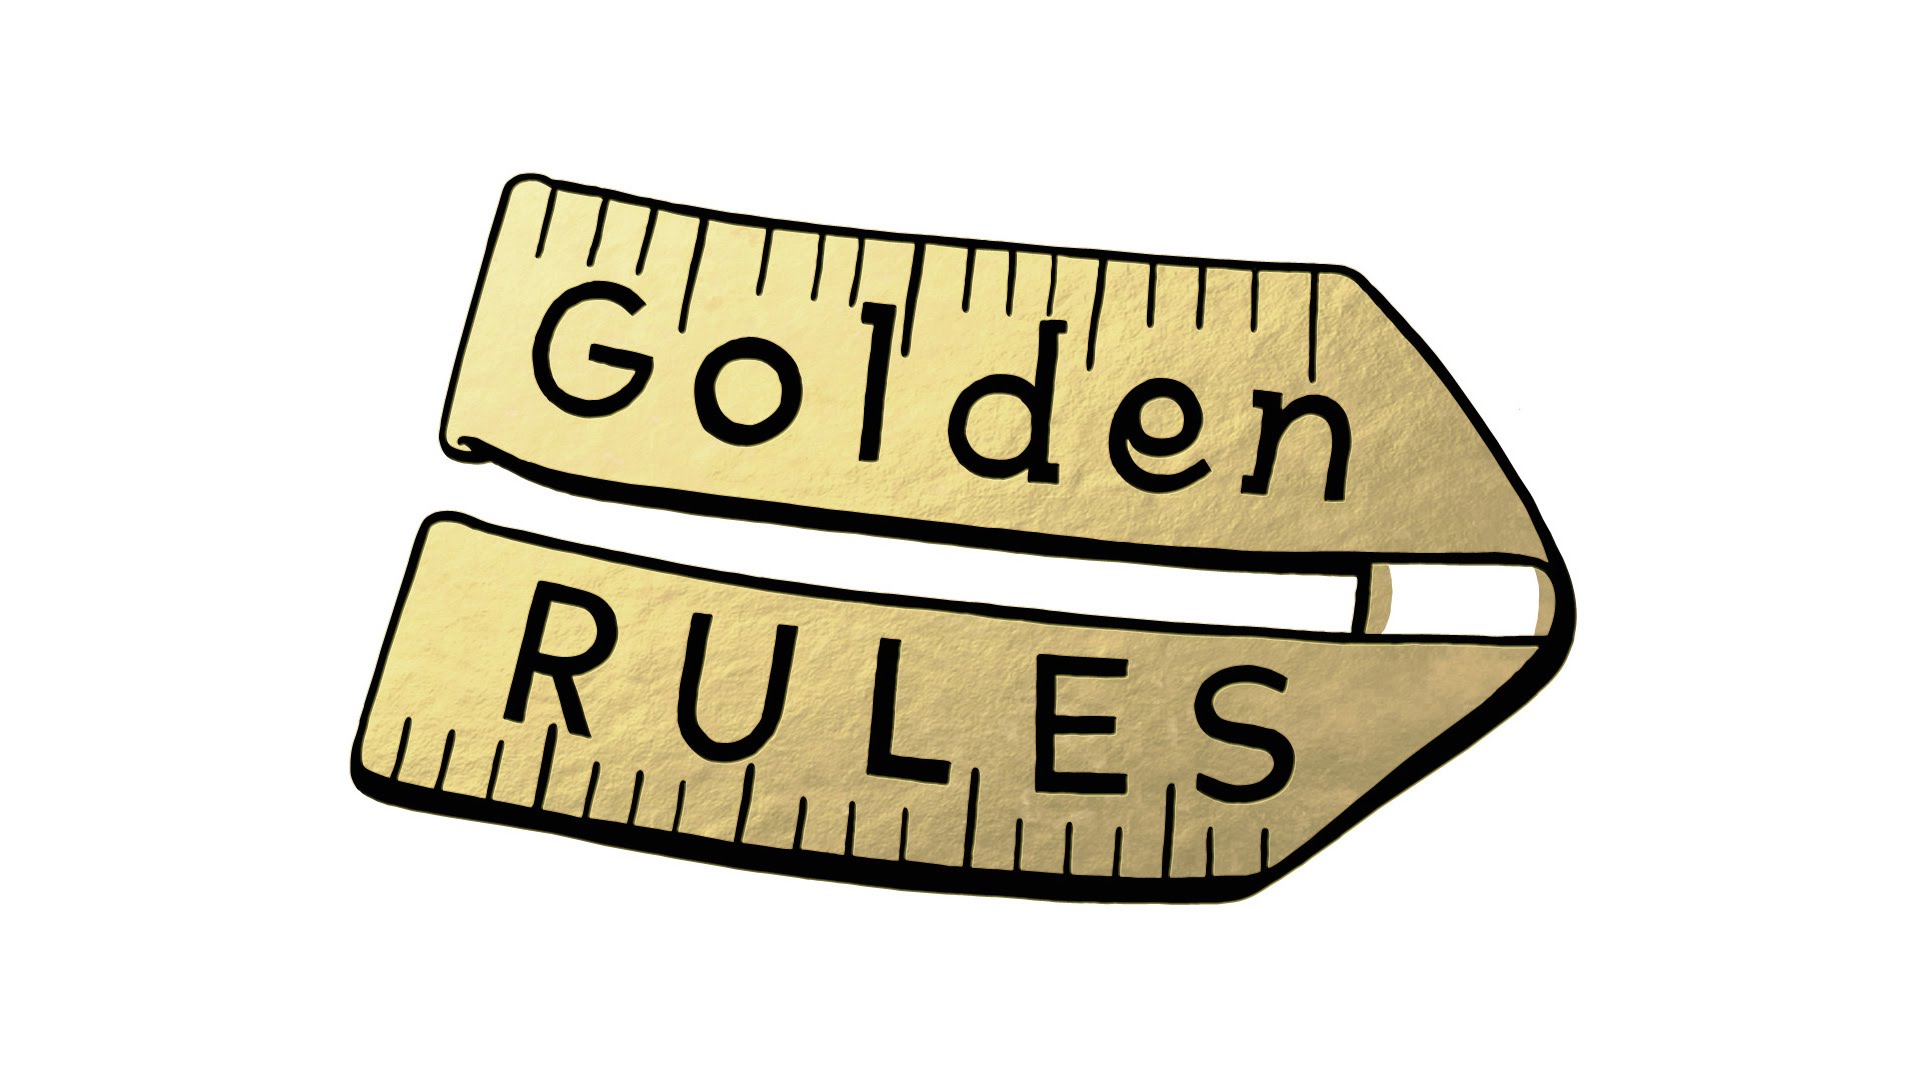 Golden Rules for Healthy Lifestyle